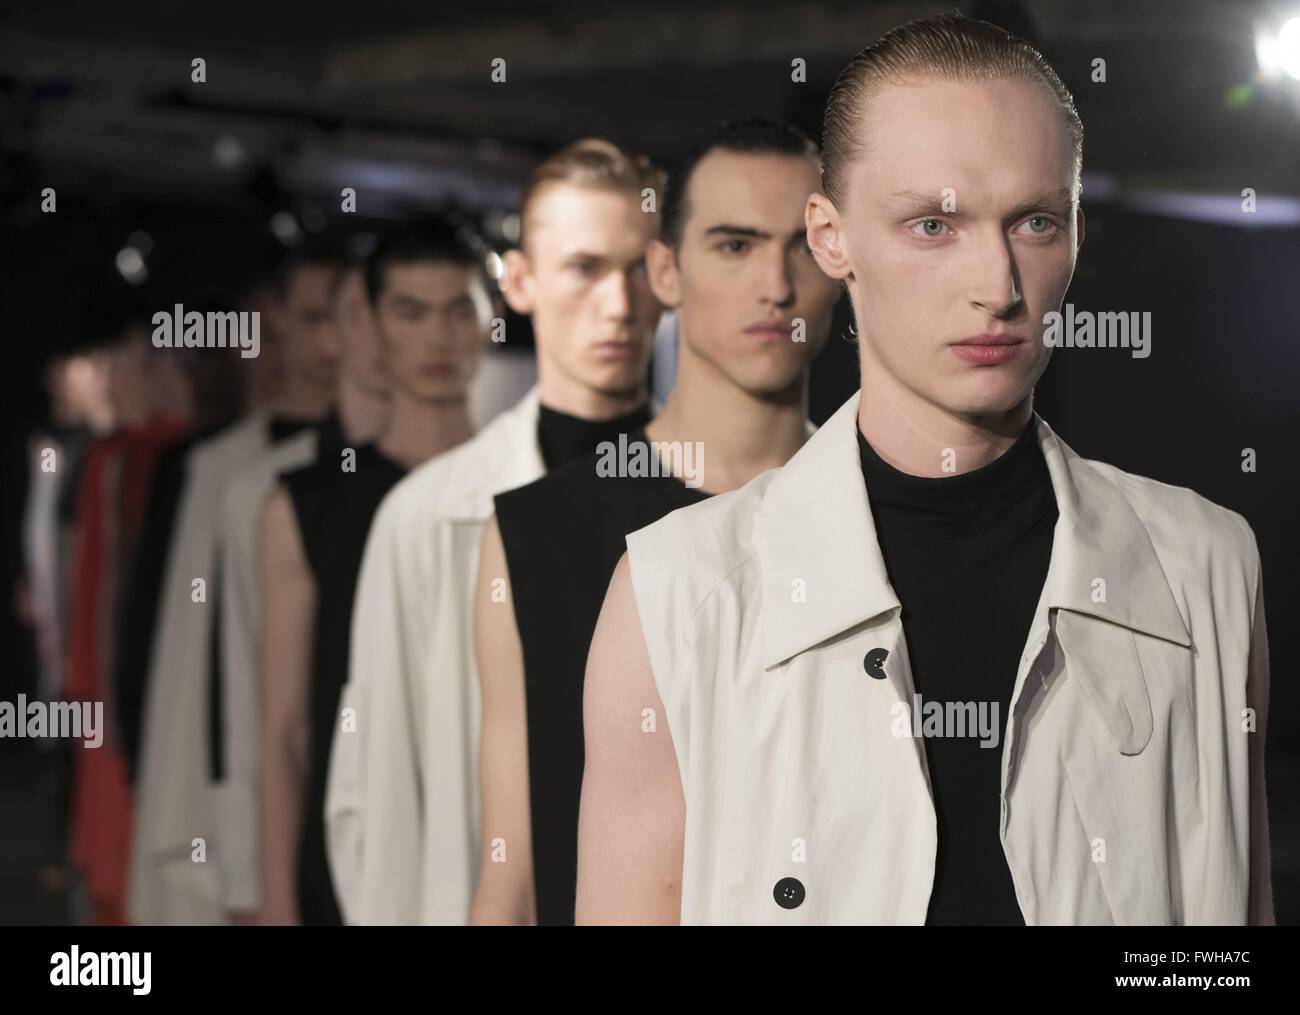 BERTHOLD presentation at London Collections Men SS17, LCM SS17. 11/06/2016 | usage worldwide Stock Photo